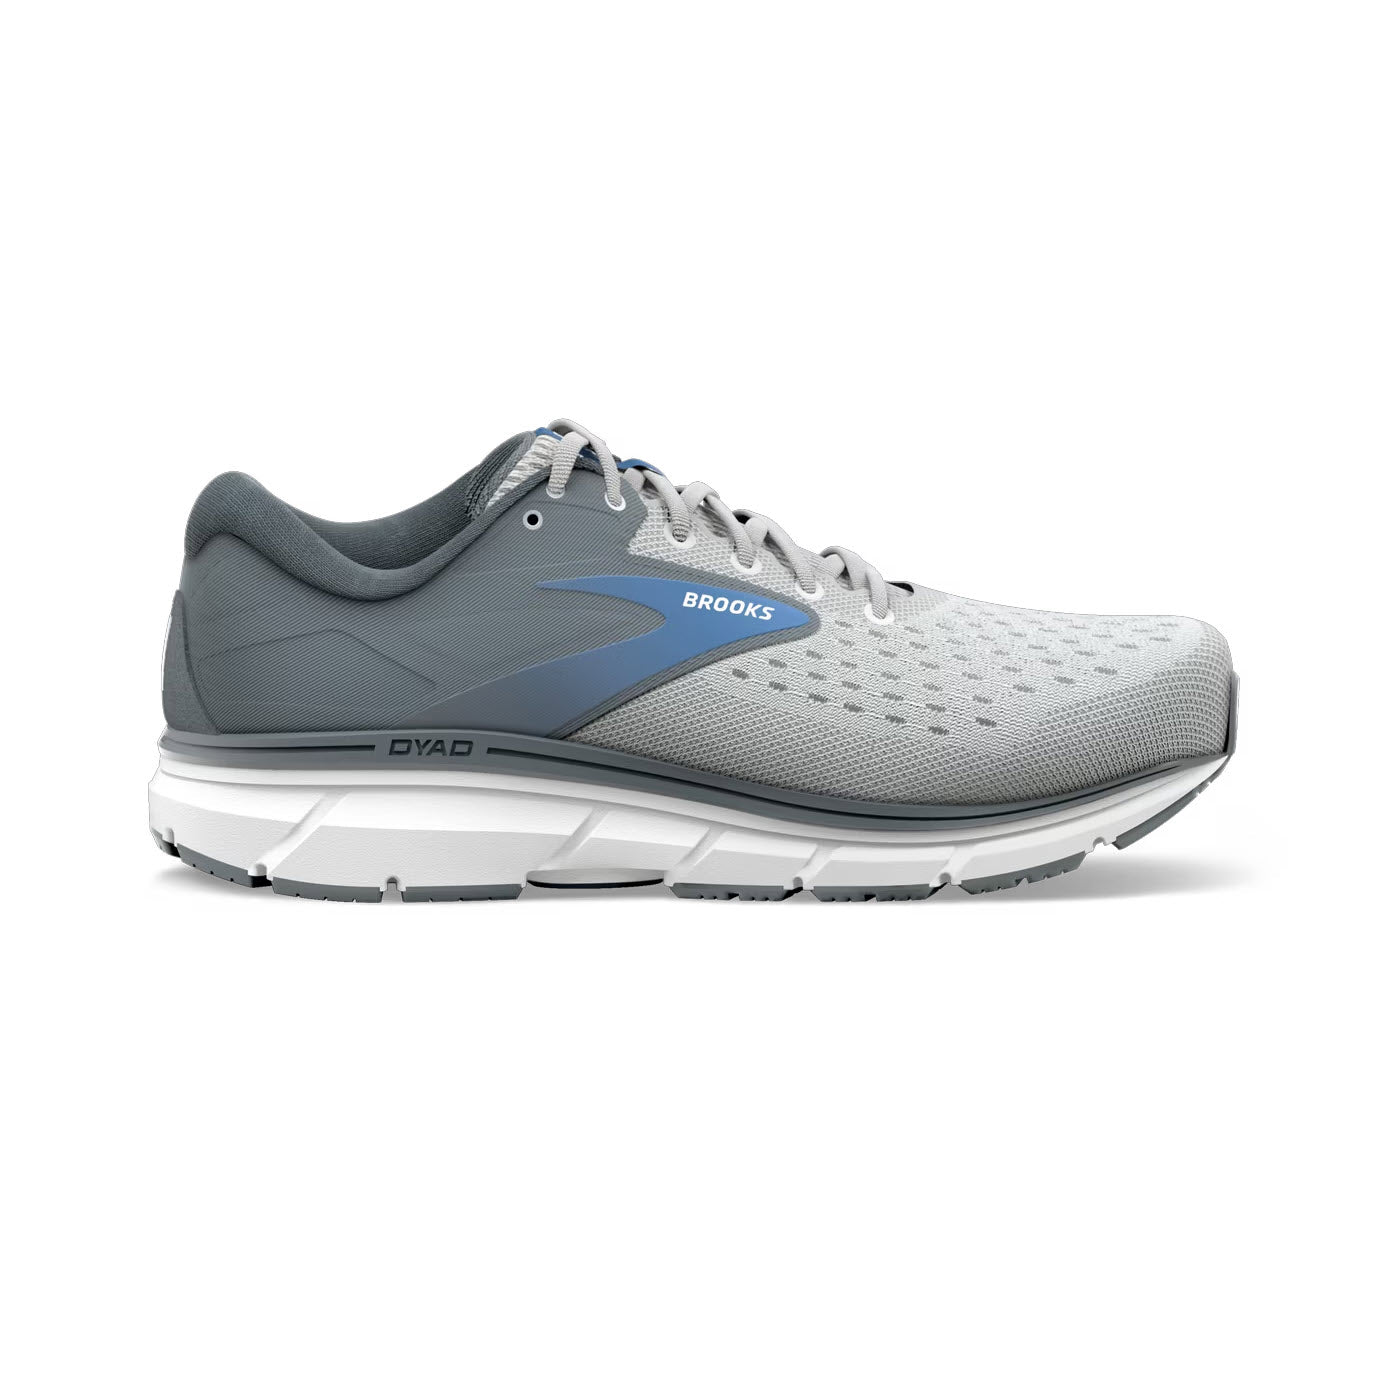 A single grey and white Brooks Dyad 11 running shoe for neutral runners against a white background.